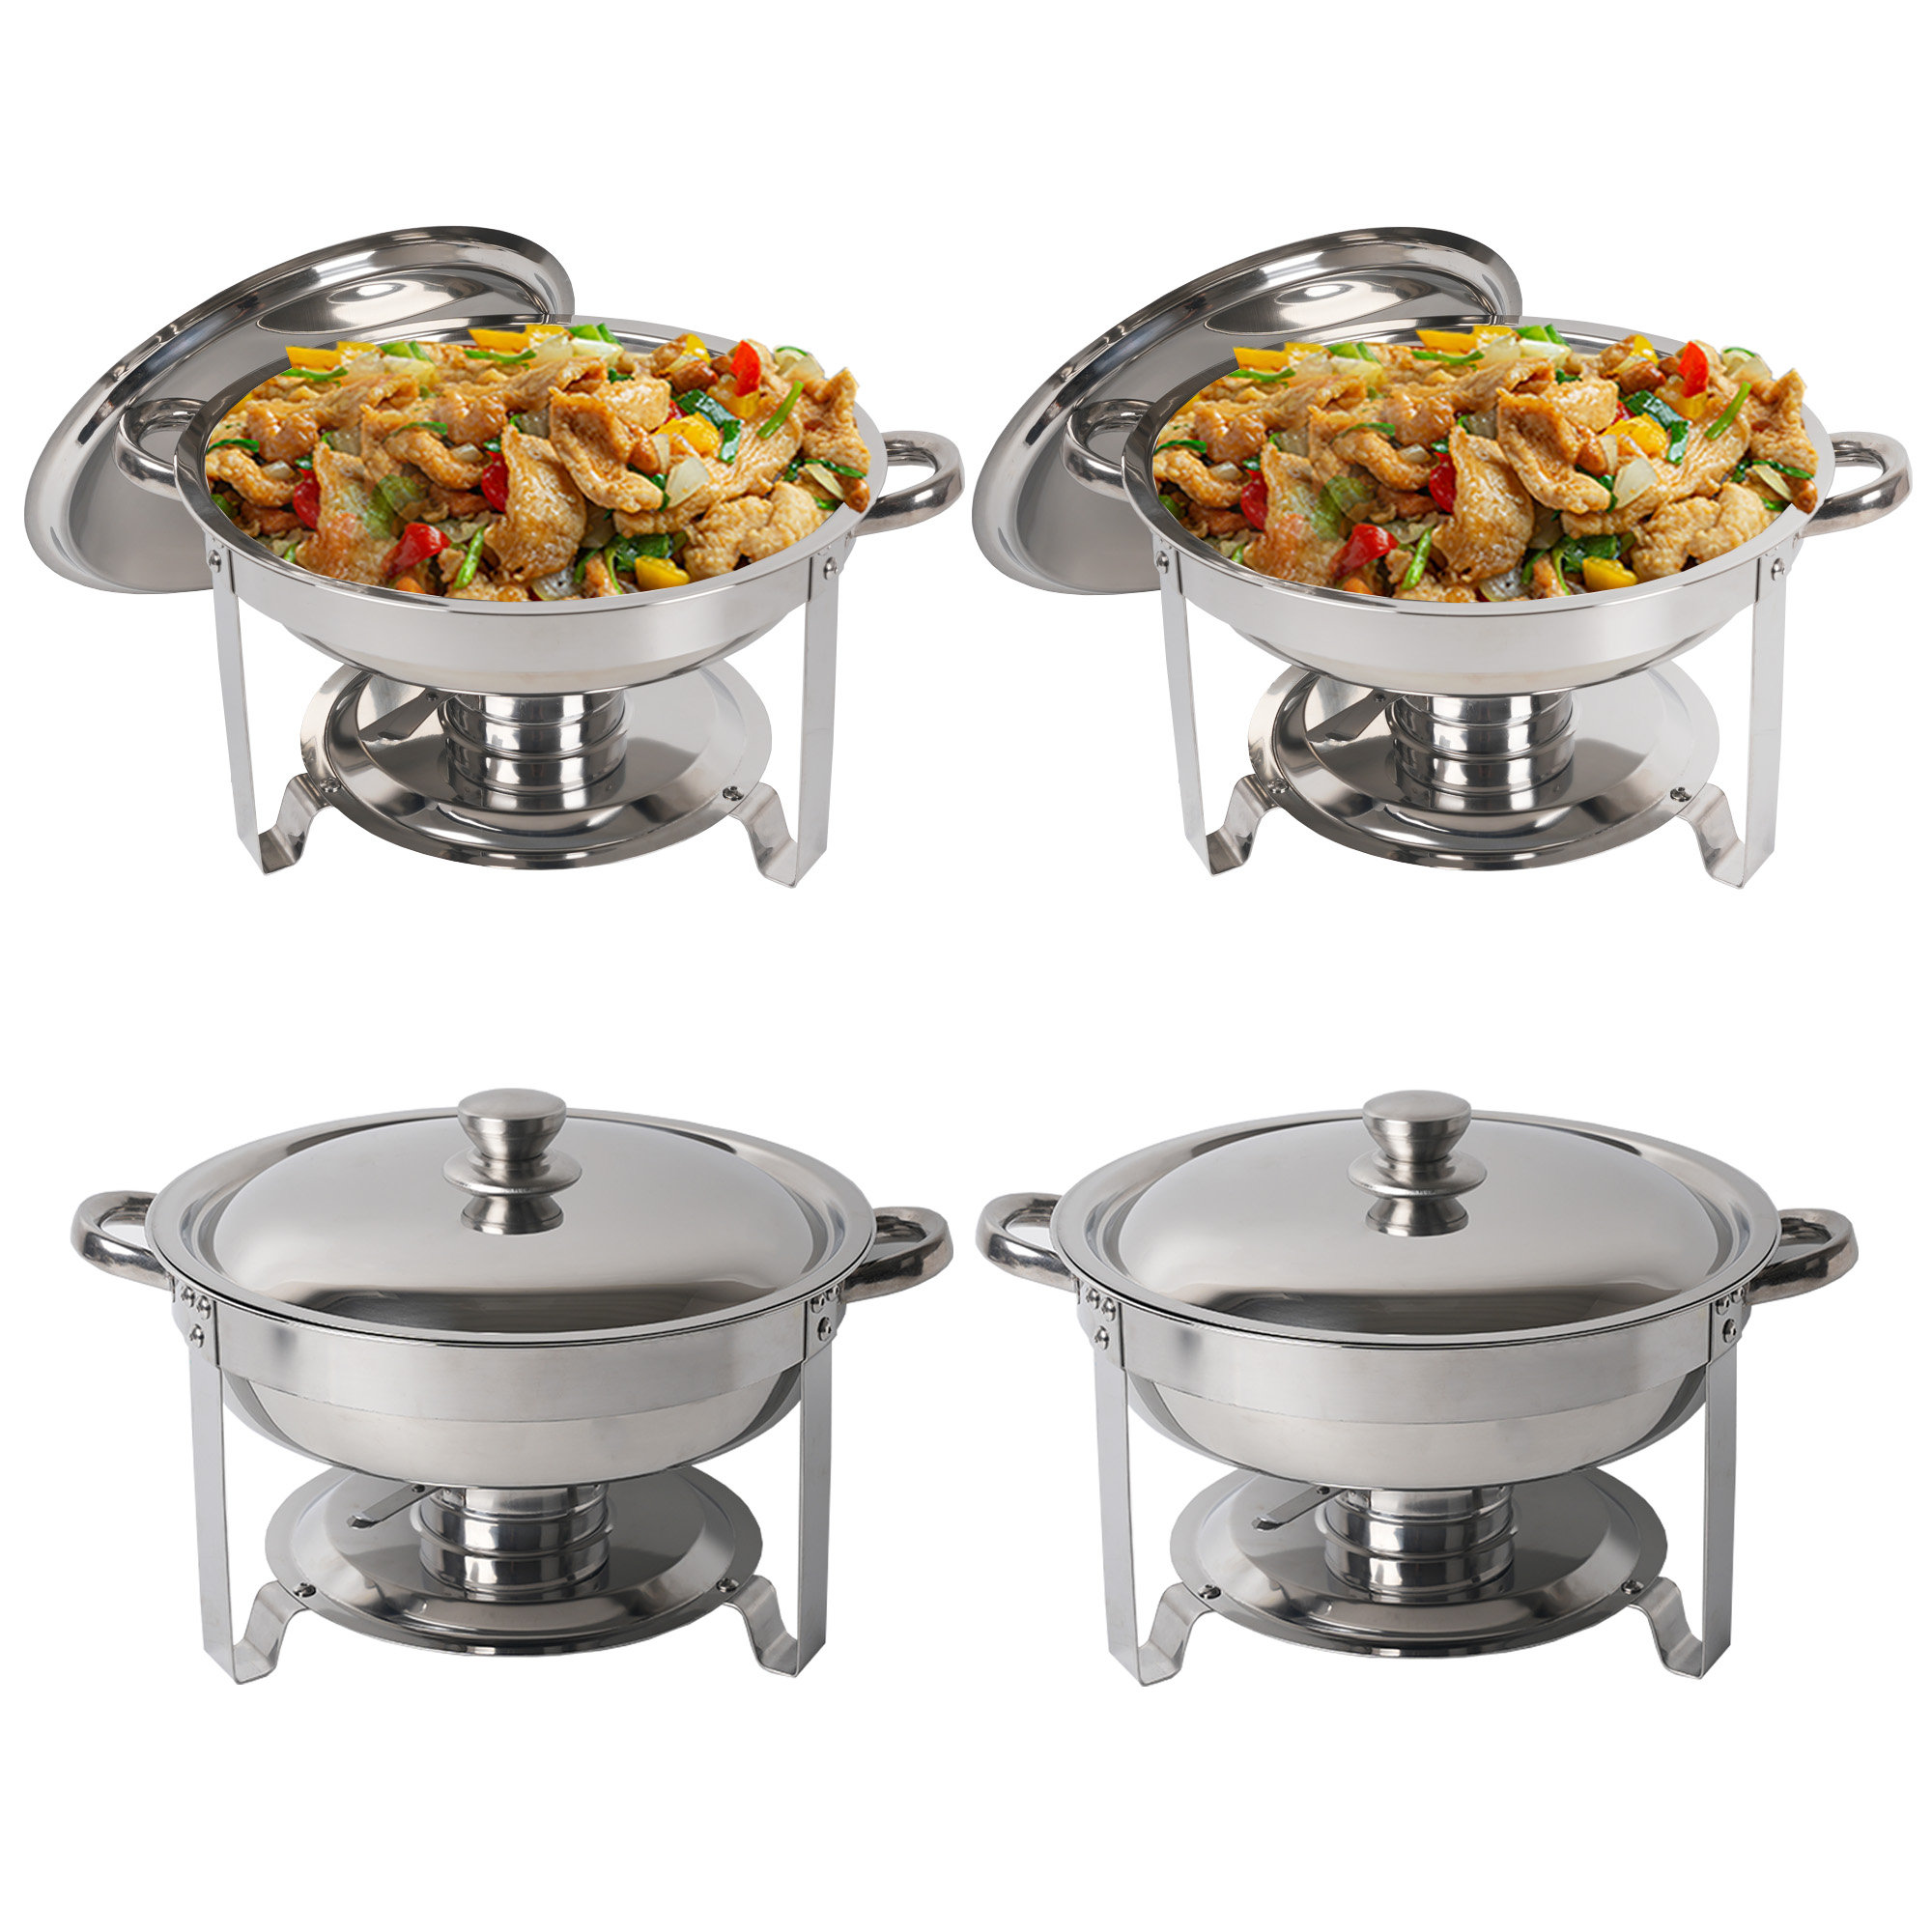 Disposable Chafing Dish Buffet Set - Set of 6 / 36pc - Half-Sized Catering  Chafers and Buffet Warmers, Buffet Server, Food Warmers for Parties,  Catering Supplies for Party - Includes Fuel Cans 